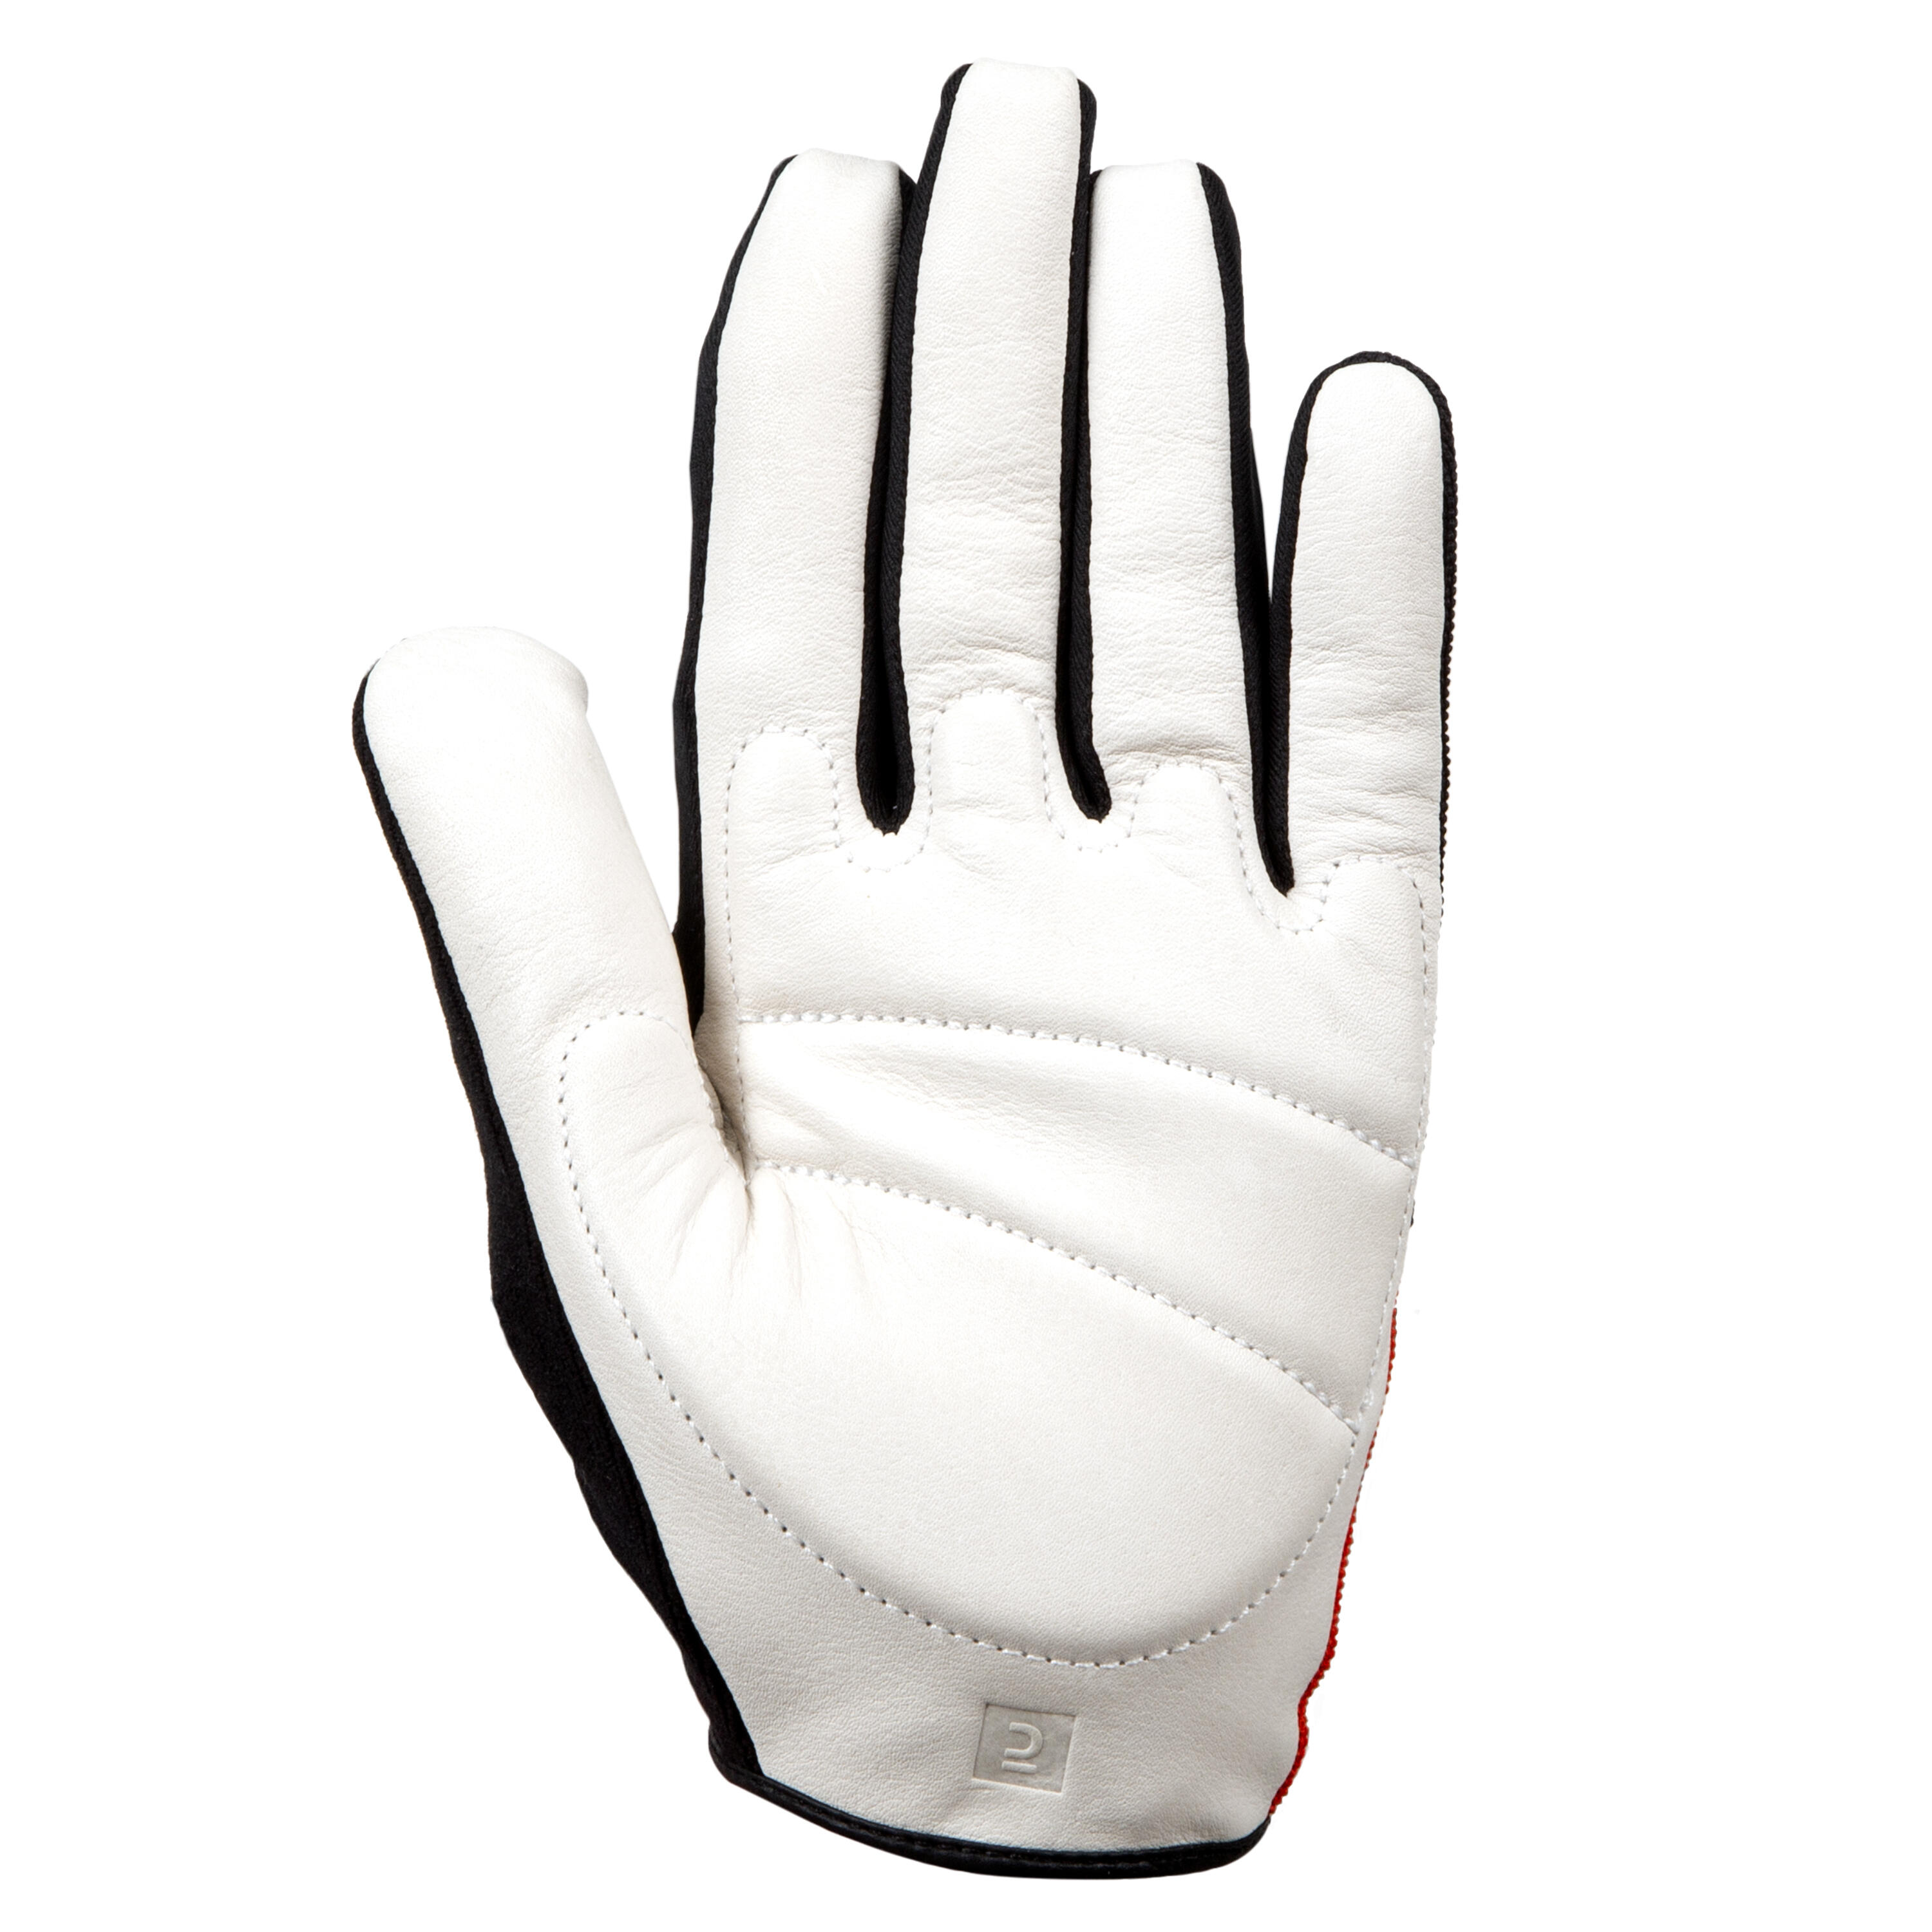 Padded One Wall / Wallball Gloves OW 500 5/7